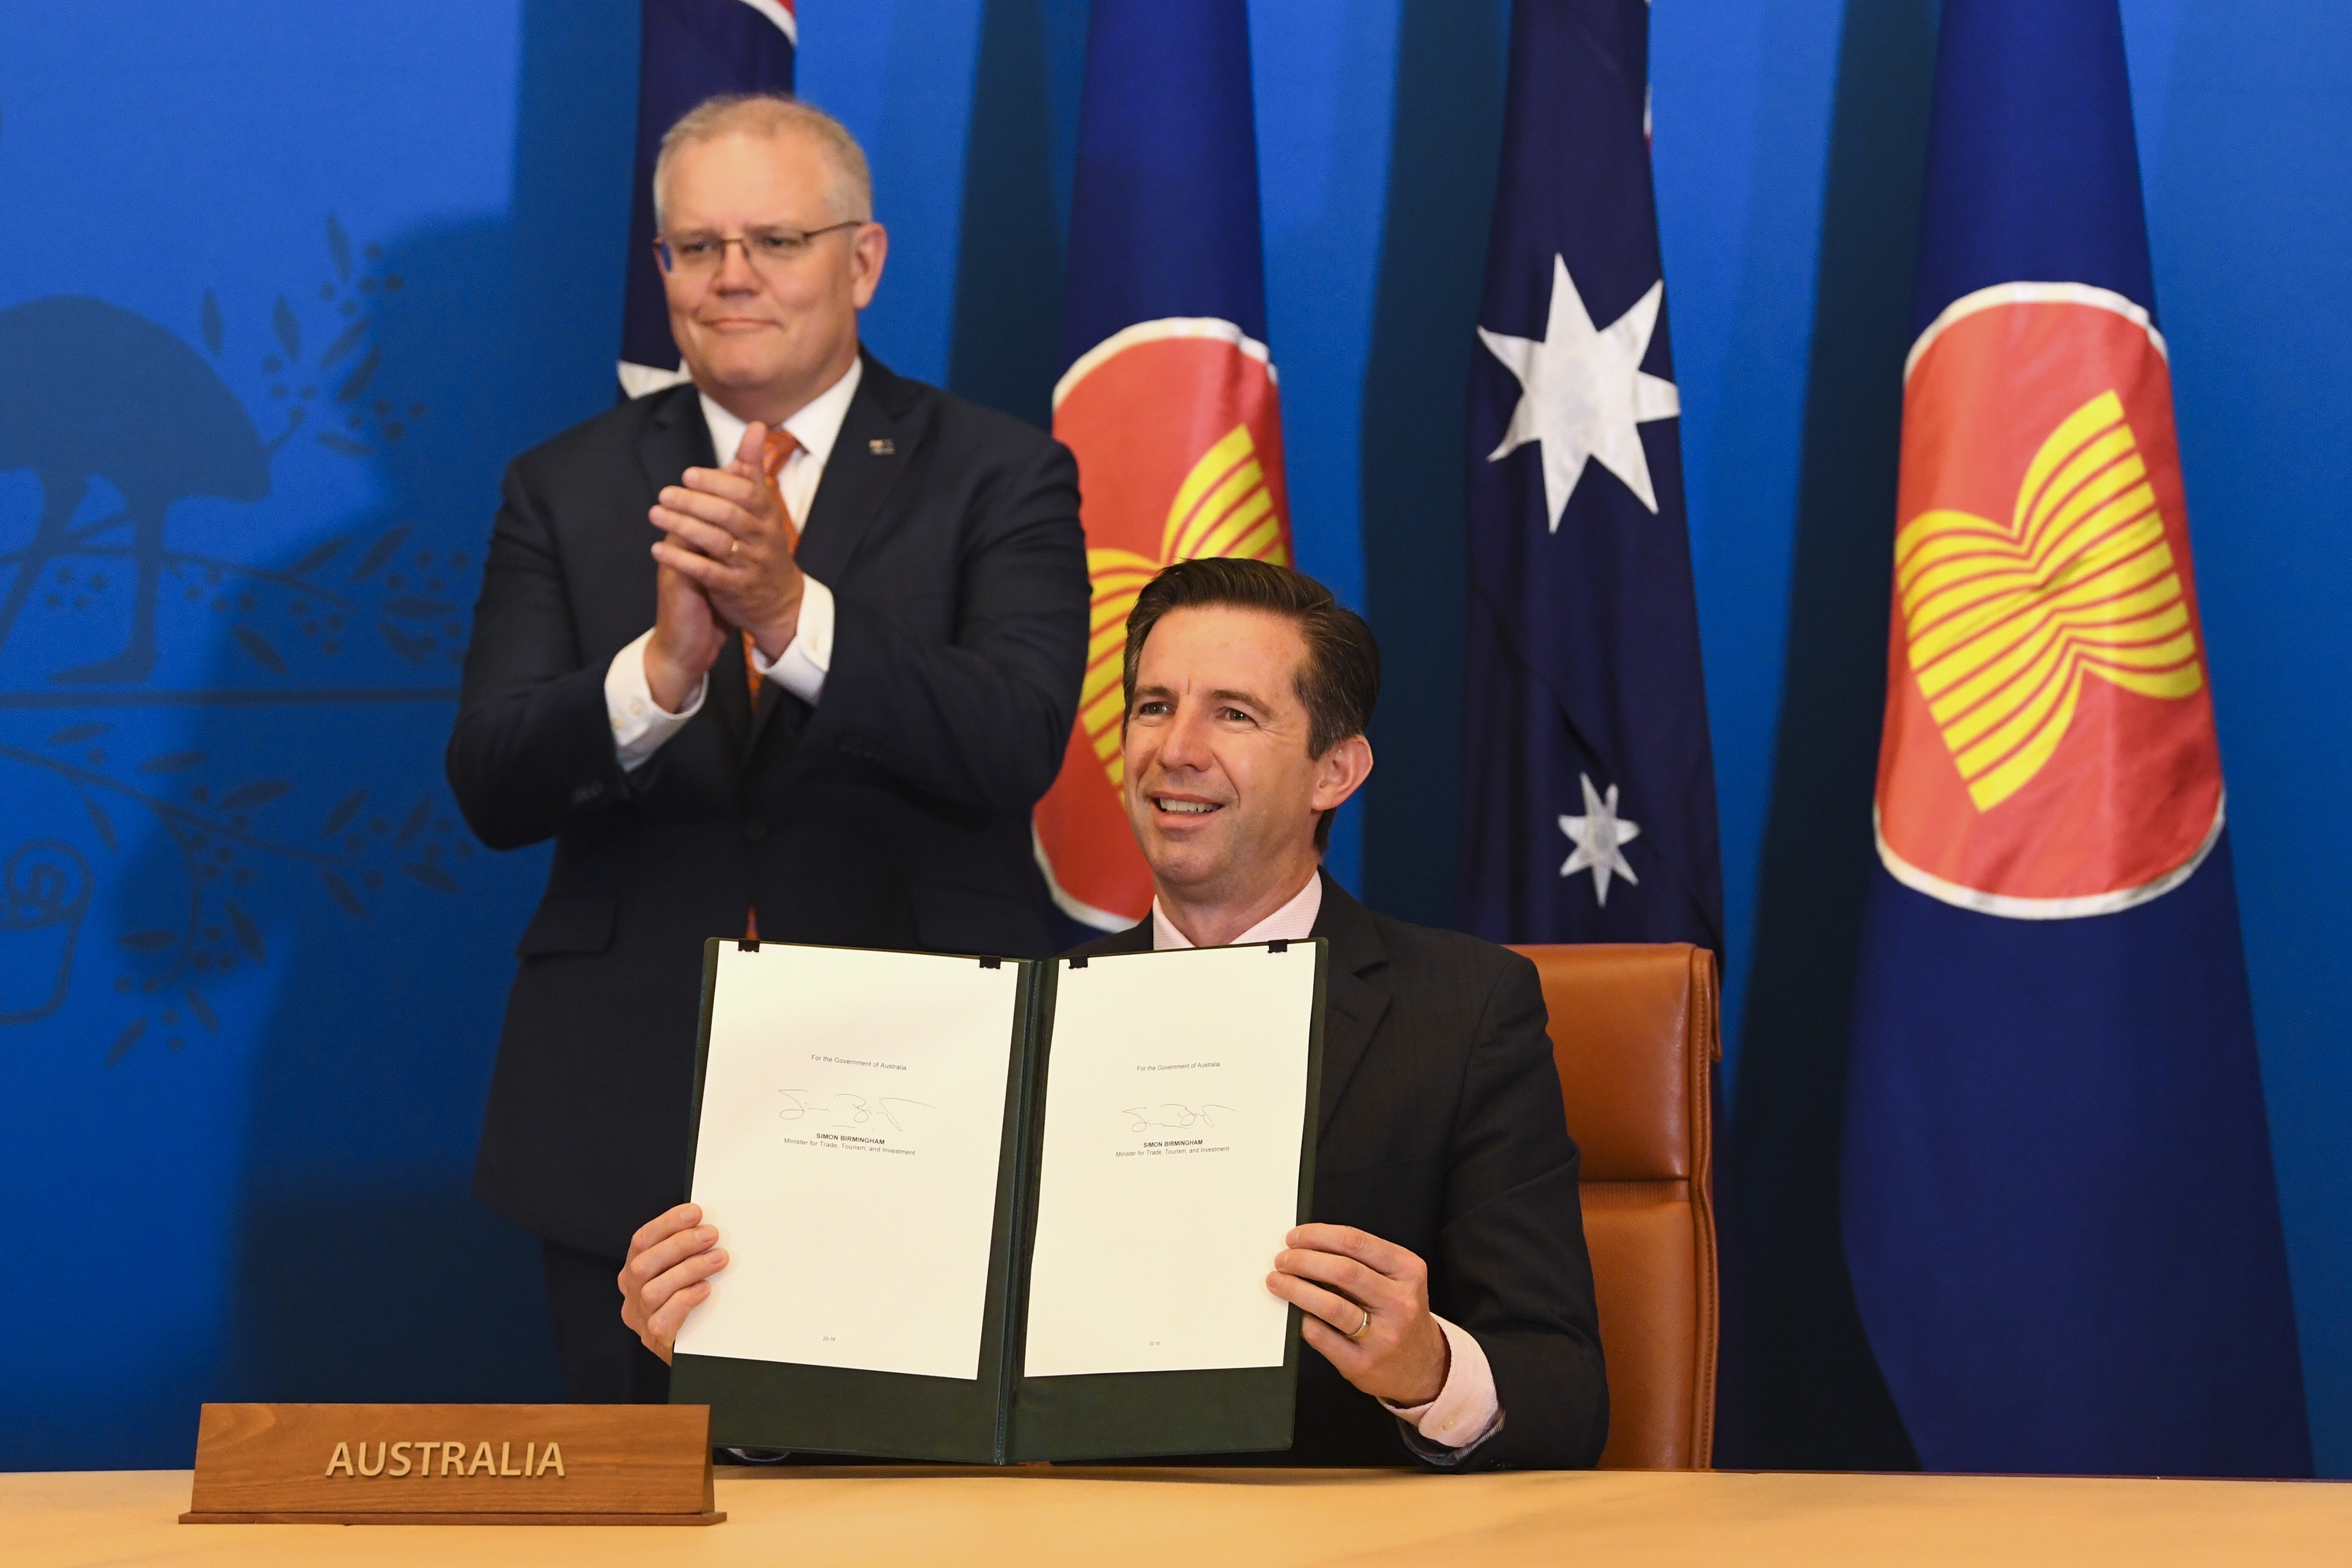 Australian Trade Minister Simon Birmingham (right) and Prime Minister Scott Morrison at the Regional Comprehensive Economic Partnership signing ceremony in Canberra on November 15. America’s closest allies, such as Australia, have forged ahead with the Comprehensive and Progressive Agreement for Trans-Pacific Partnership and RCEP without US participation. Photo: EPA-EFE